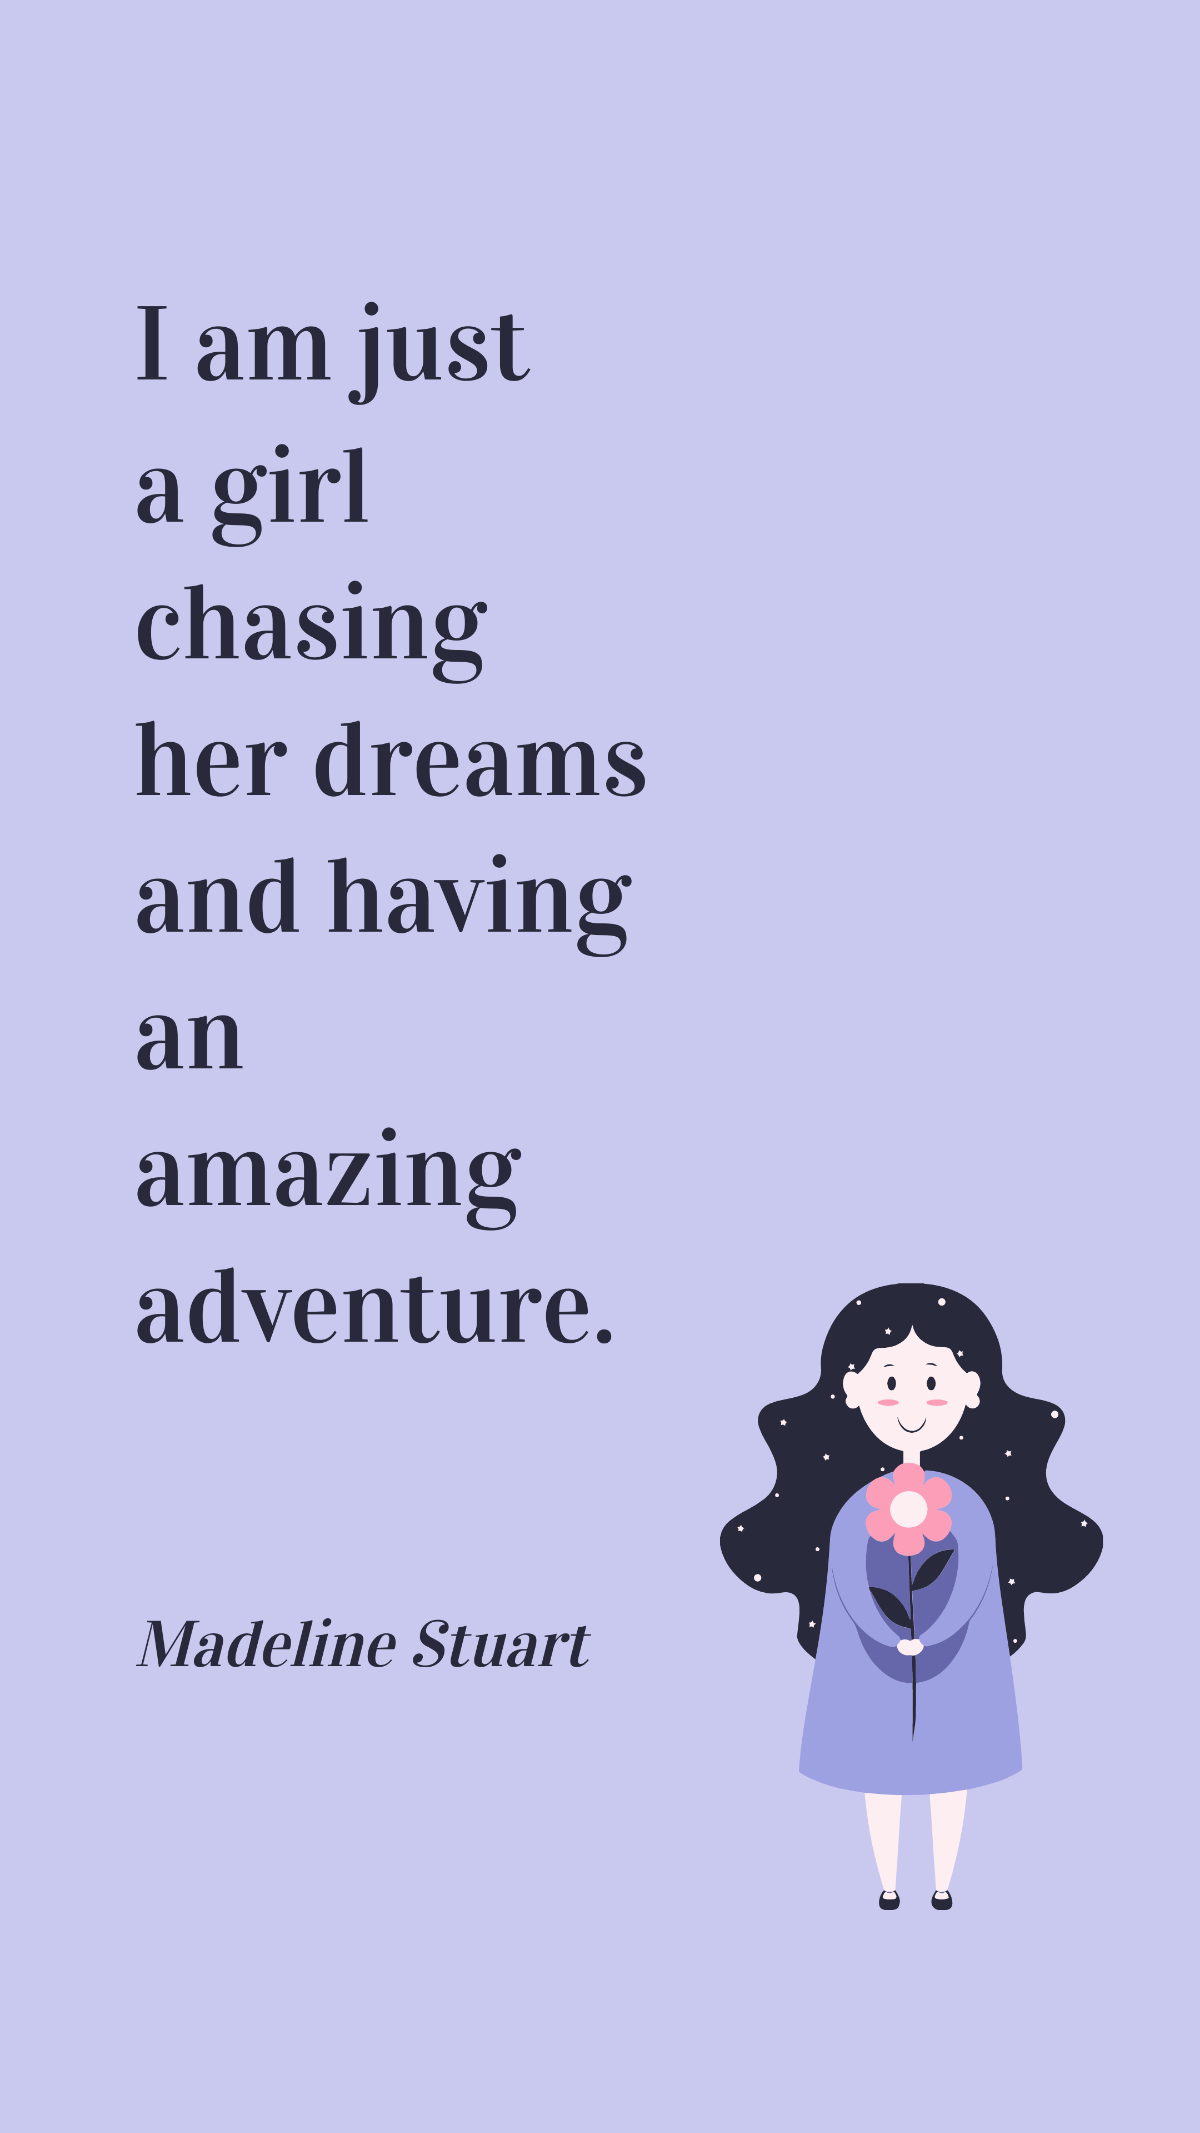 Free Madeline Stuart - I am just a girl chasing her dreams and having an amazing adventure. Template